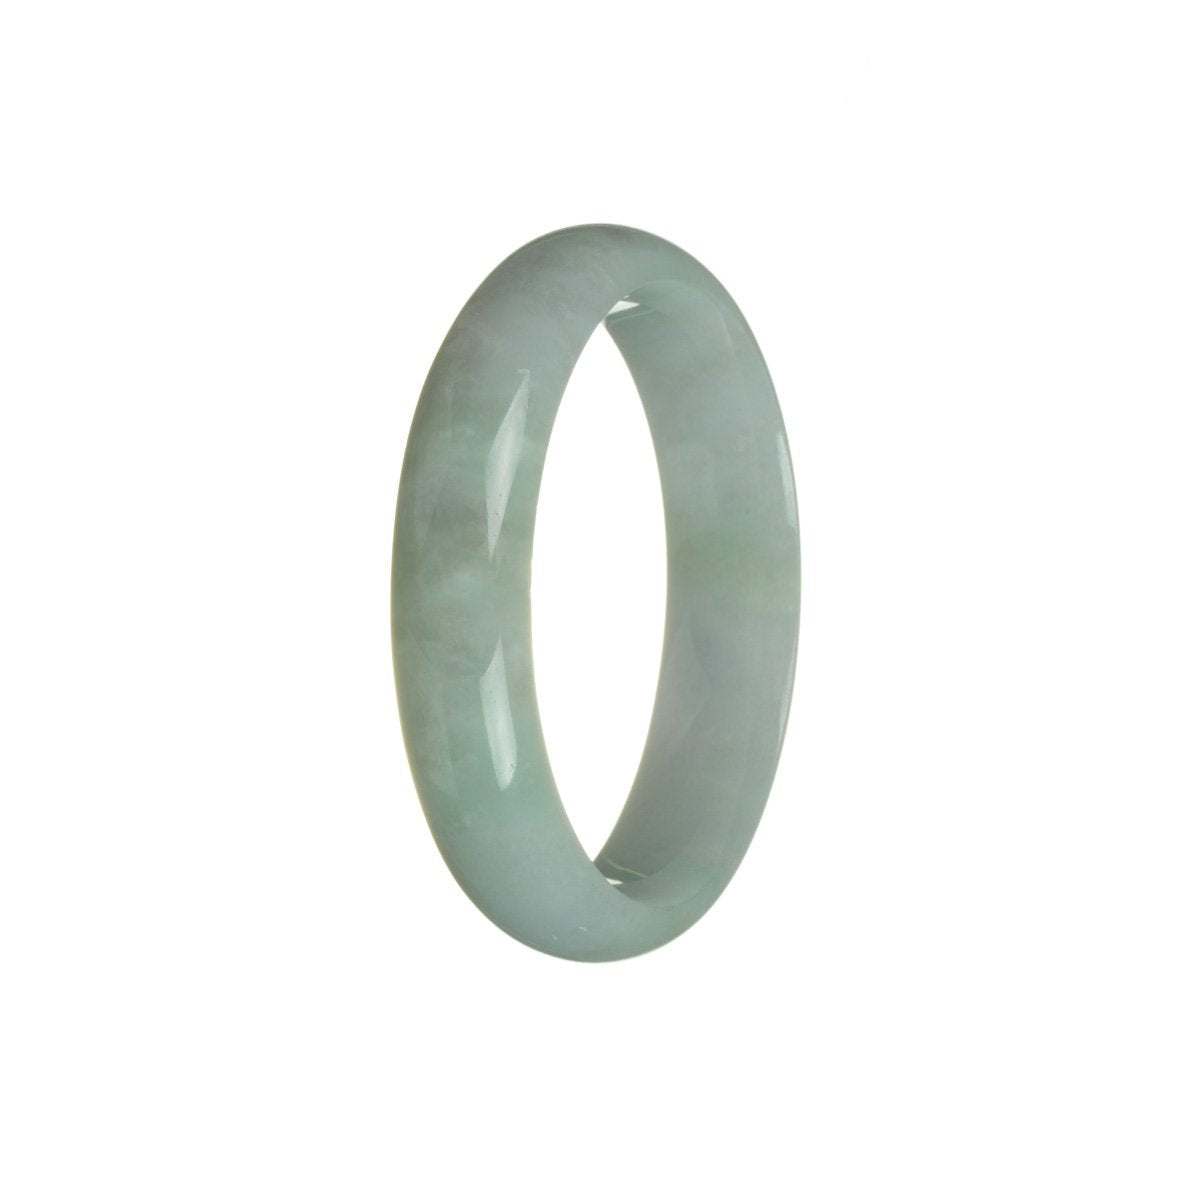 Certified Grade A Green with Pale Lavender Jadeite Jade Bangle - 56mm Half Moon